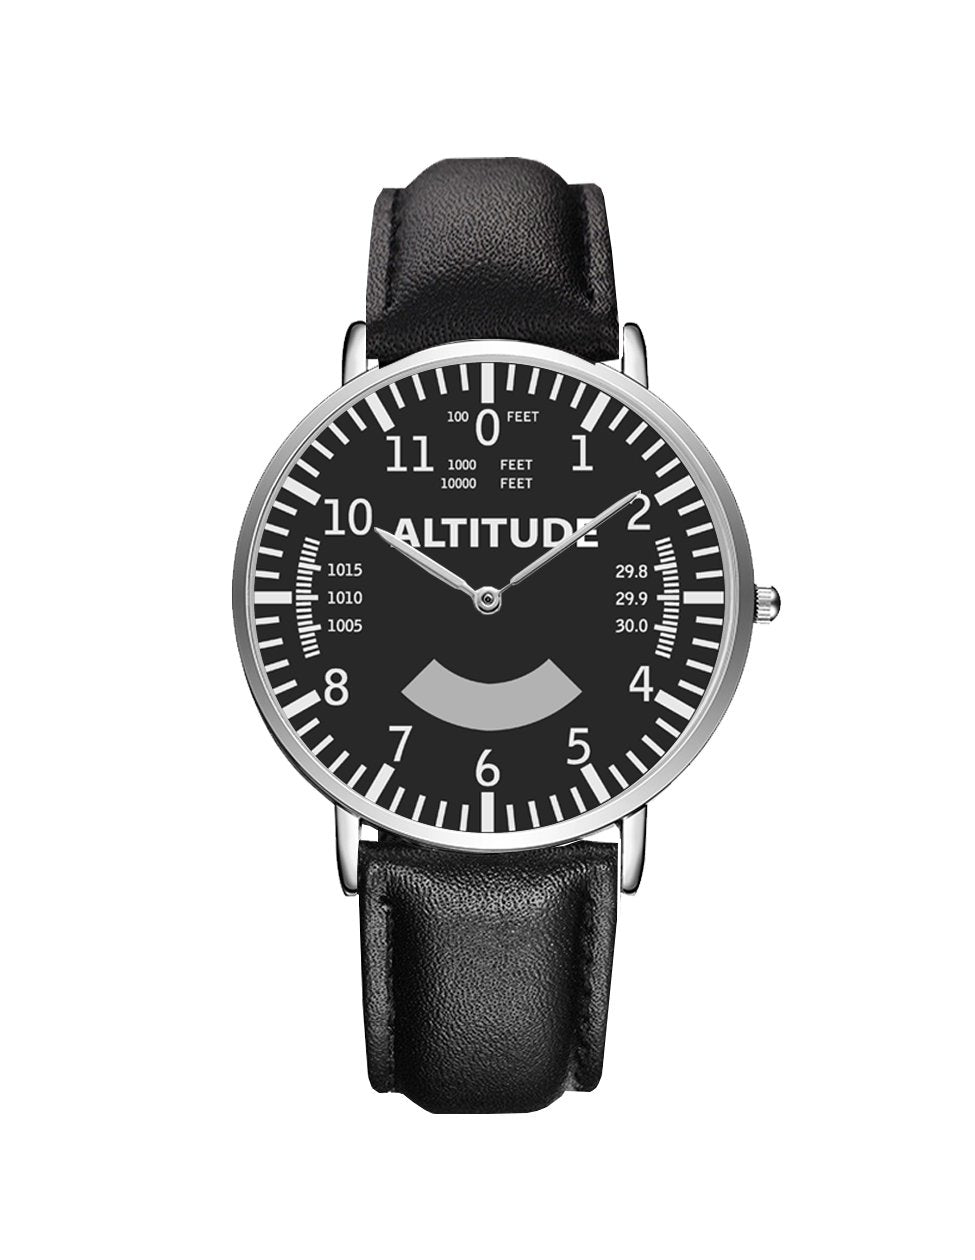 Airplane Instrument Series (Altitude) Leather Strap Watches Pilot Eyes Store Silver & Black Leather Strap 